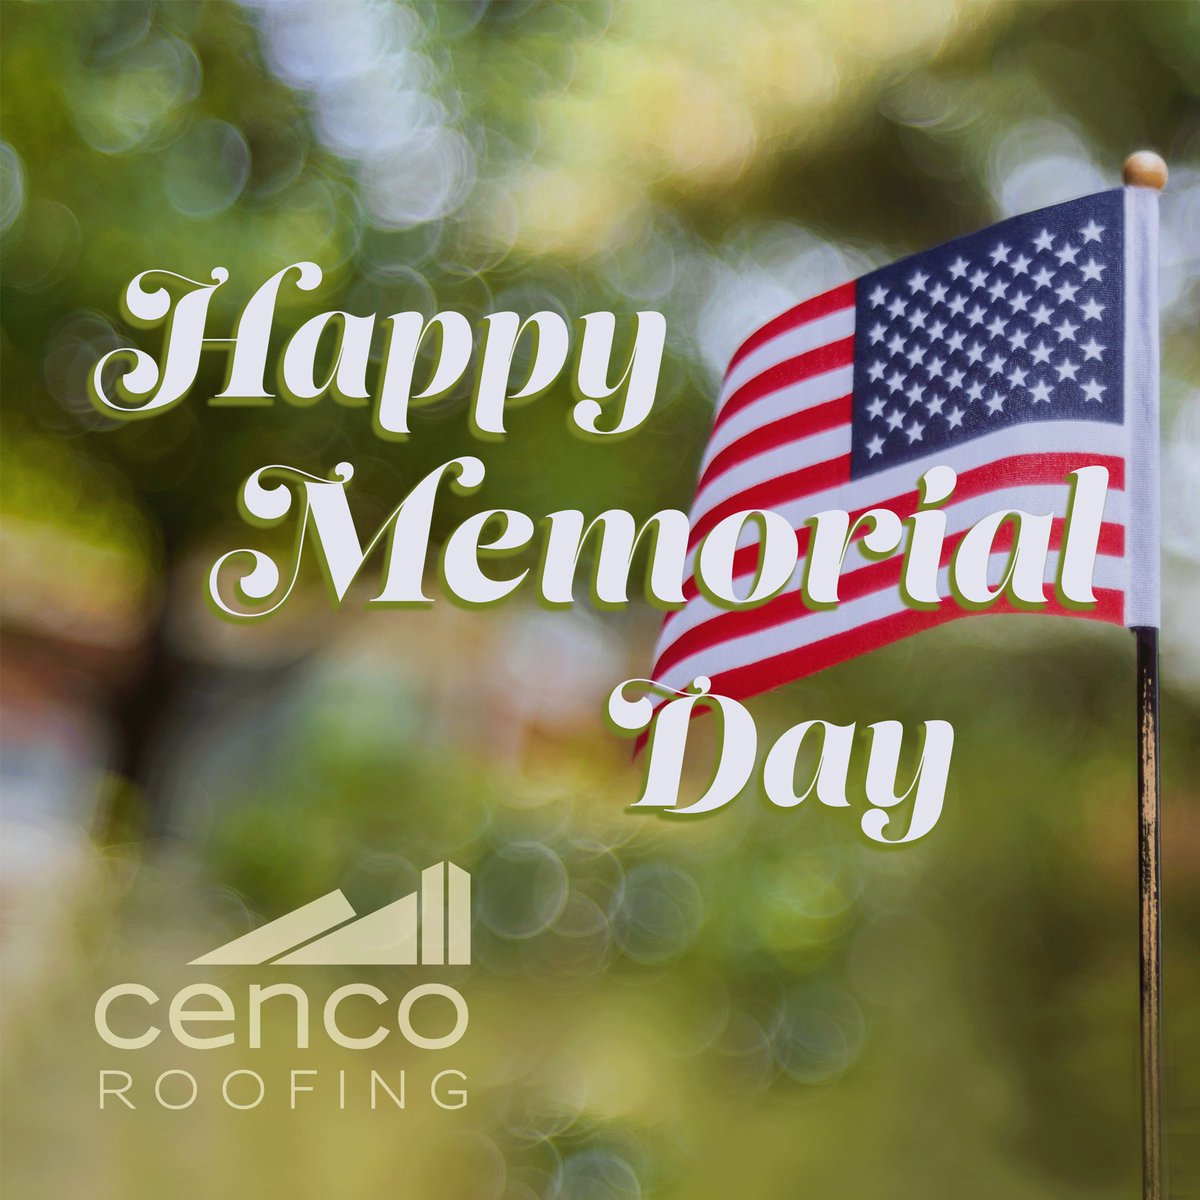 Today we celebrate and remember the lives lost while serving our nation. ❤️

#memorialday #remember #honor #servingournation #cencoroofing #denver #roofingcompany  cencoroofing.com